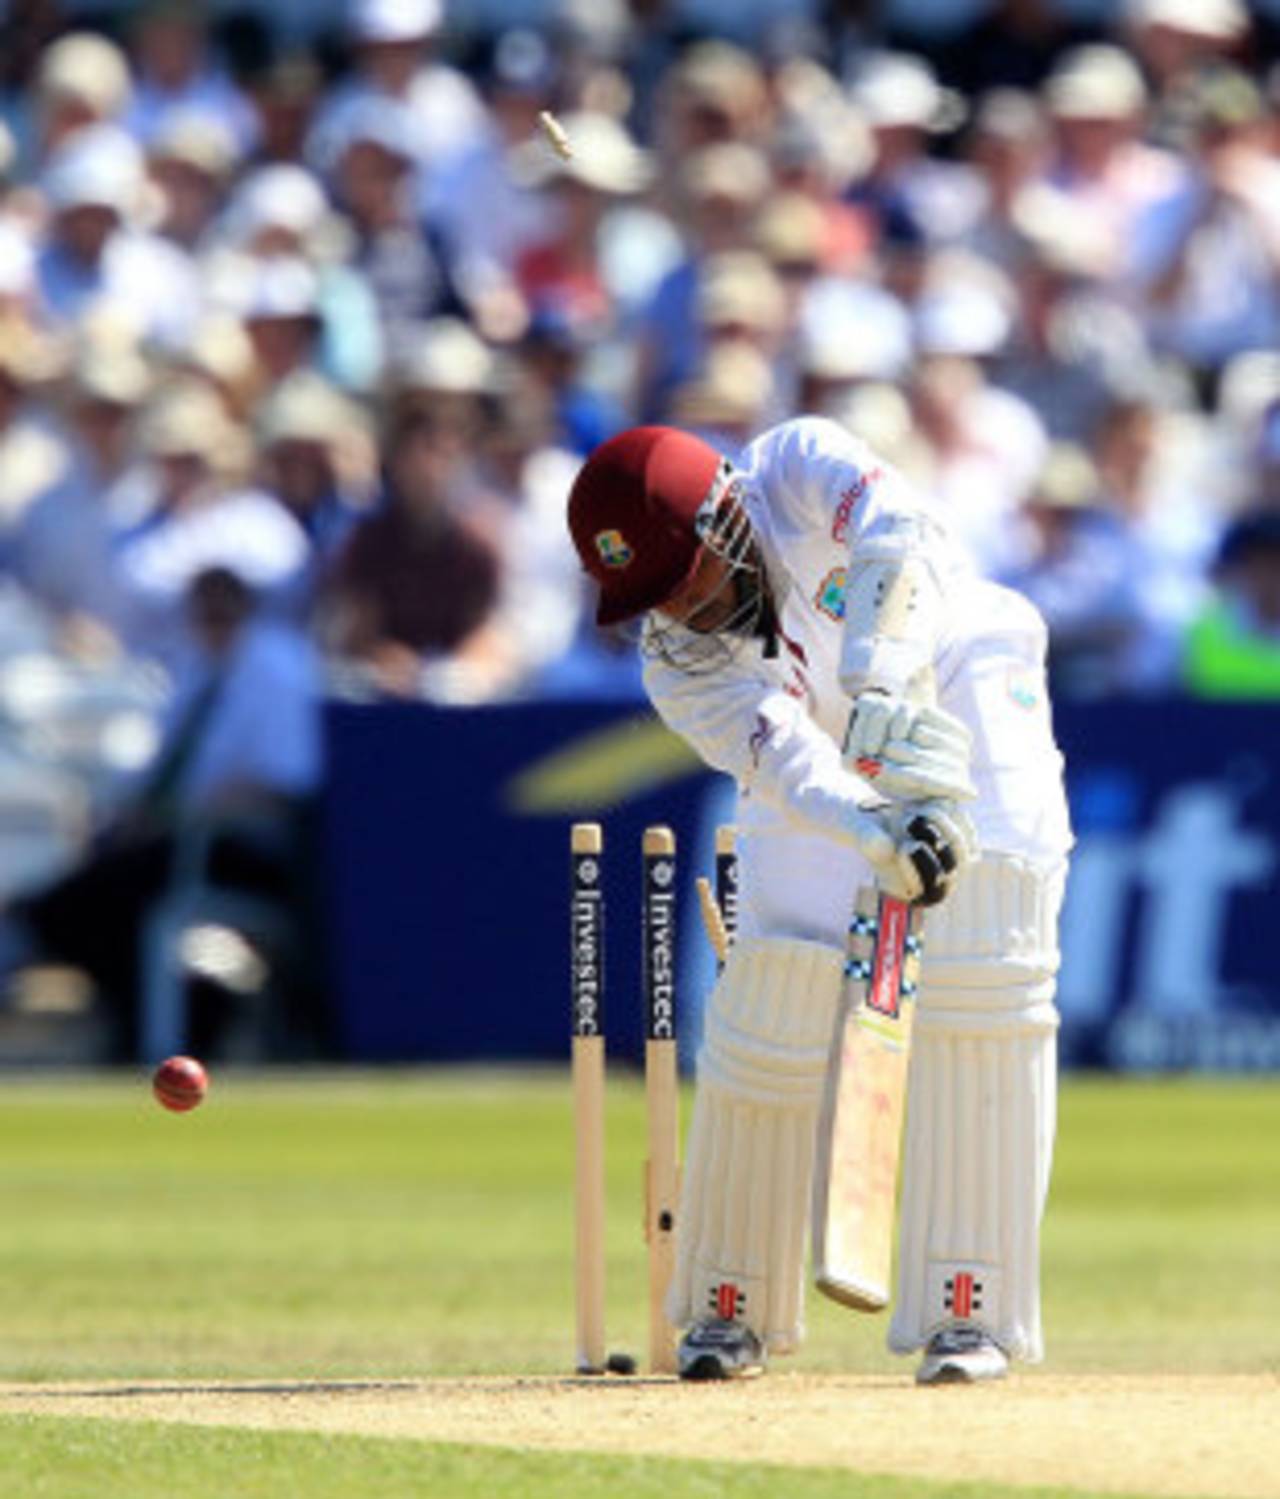 With his gesture Ramdin has ended up putting pressure on himself to perform in future&nbsp;&nbsp;&bull;&nbsp;&nbsp;PA Photos